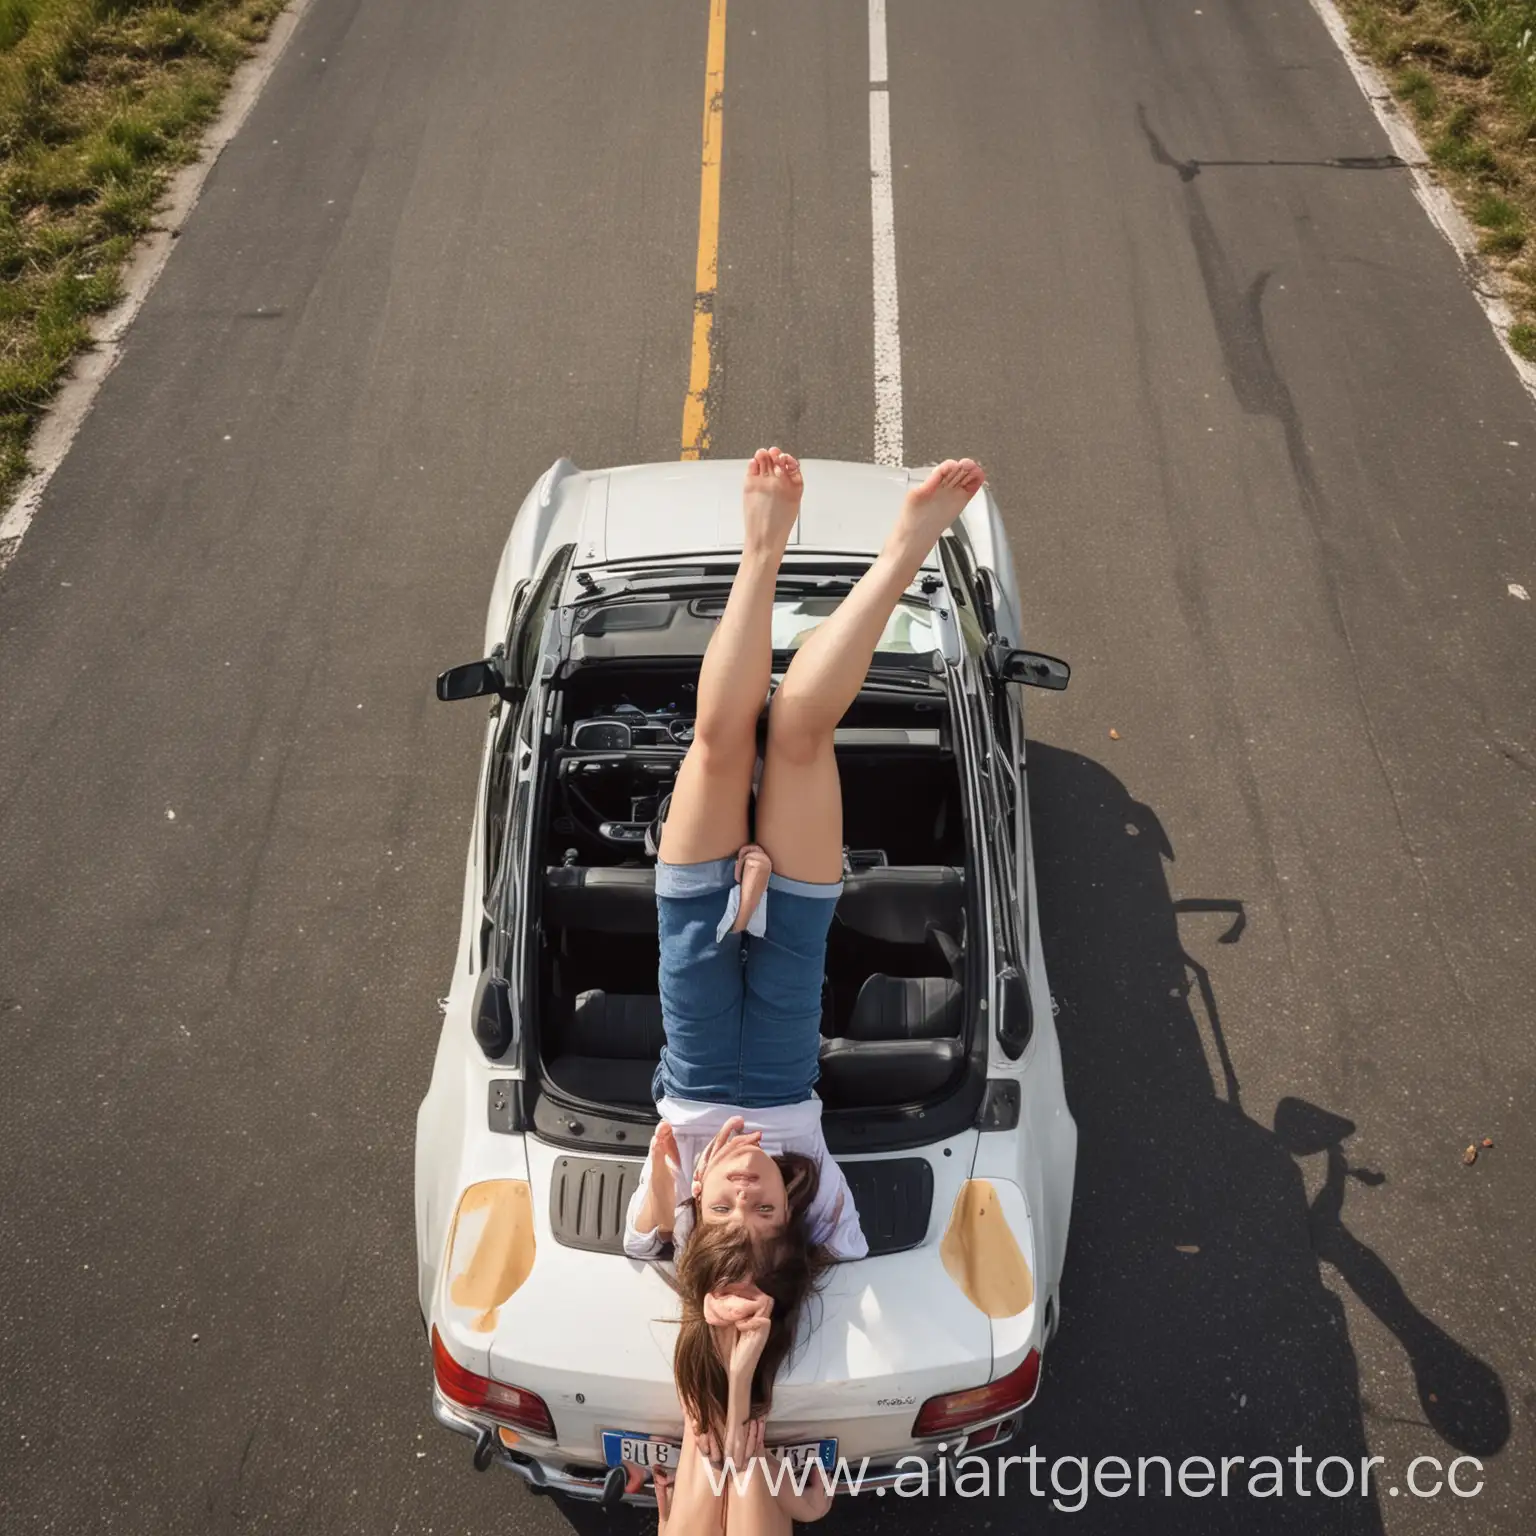 Young-Girl-Sitting-on-Car-Roof-with-Legs-Spread-on-Country-Road